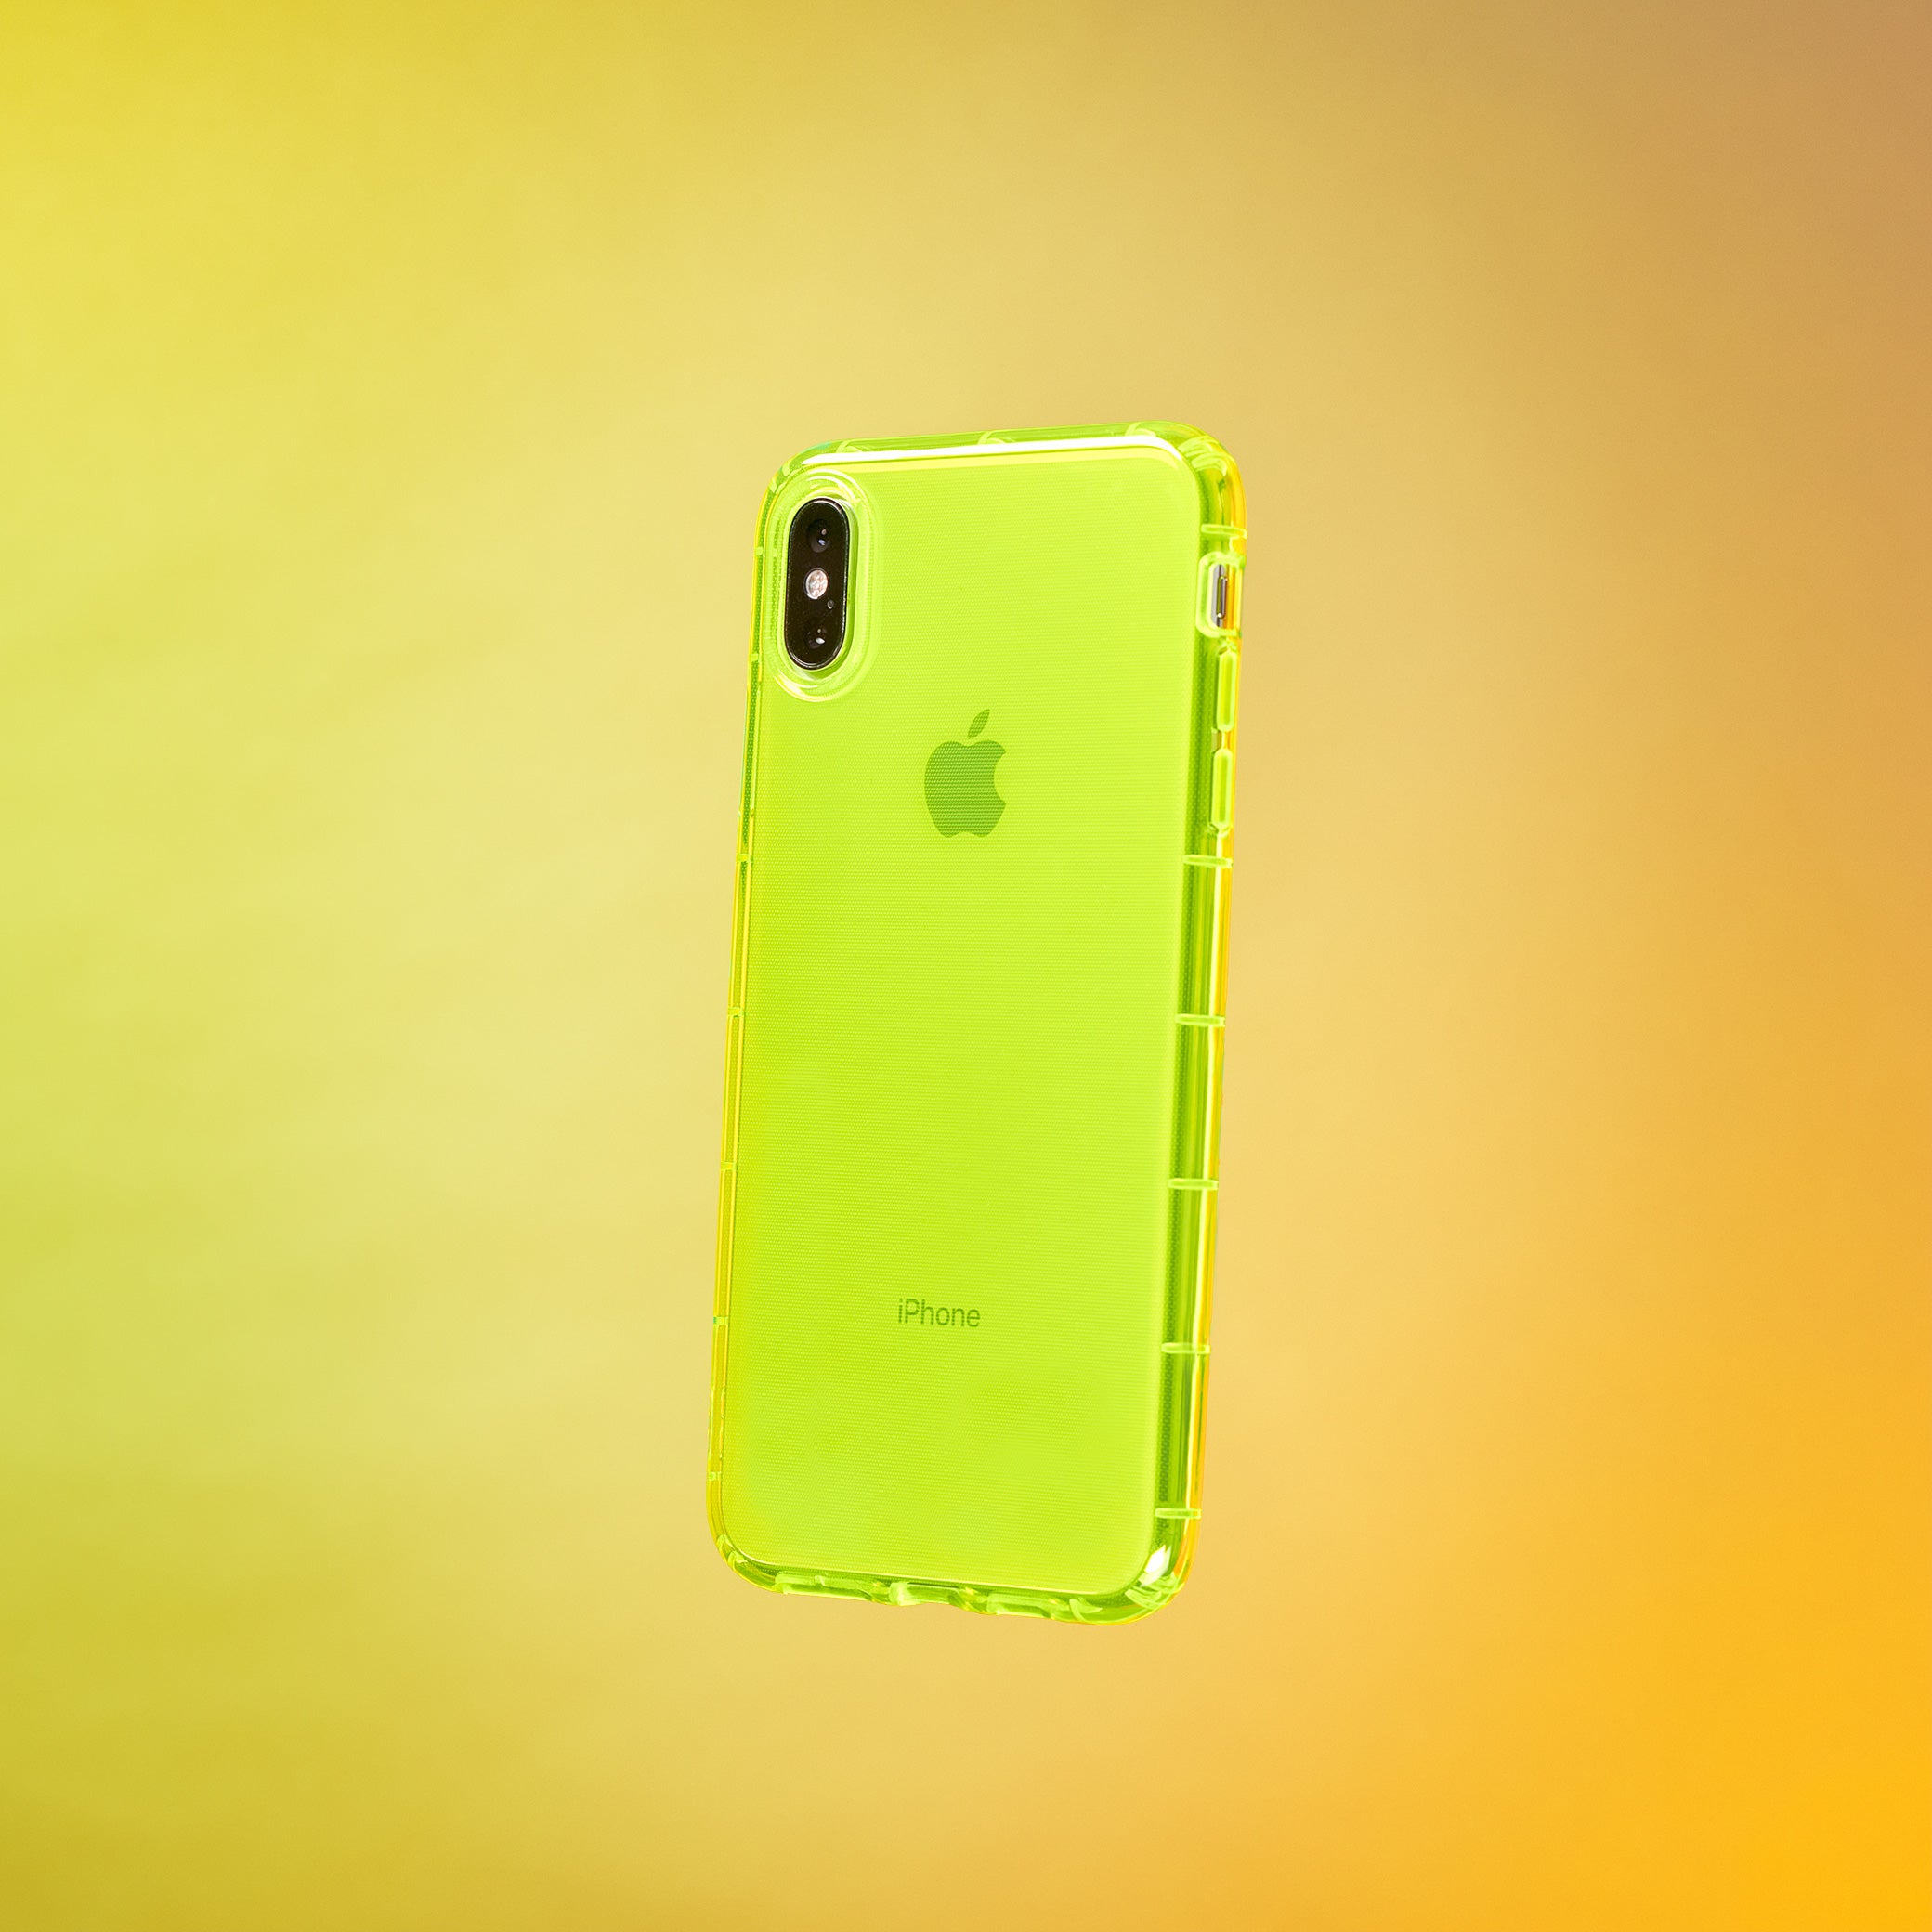 Highlighter Case for iPhone Xs Max - Conspicuous Neon Yellow